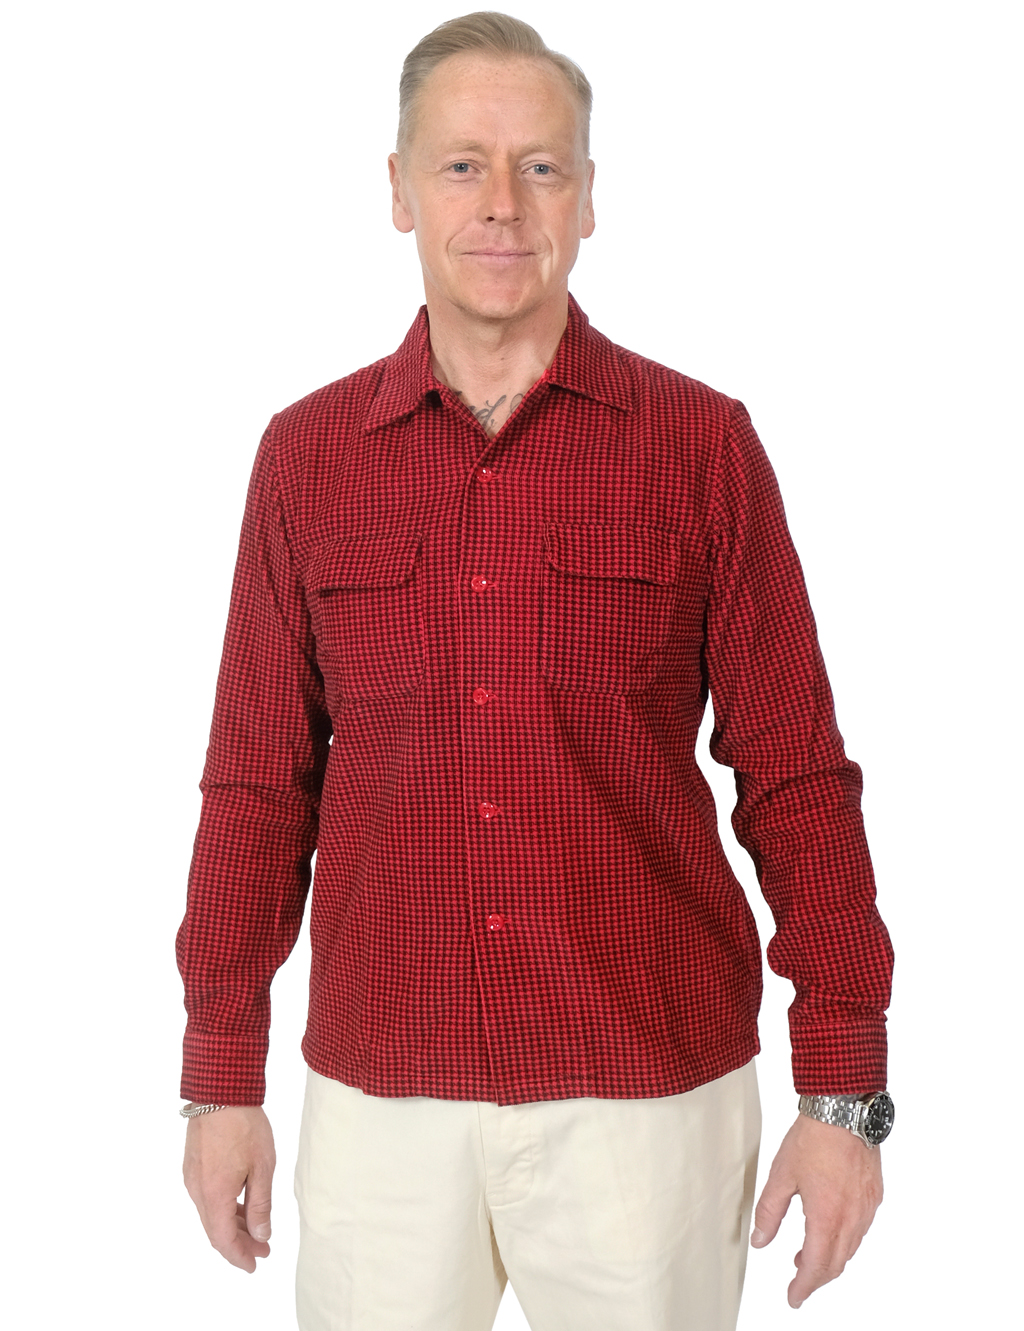 Levis Vintage Clothing - Deluxe Check Shirt Dogtooth - Red